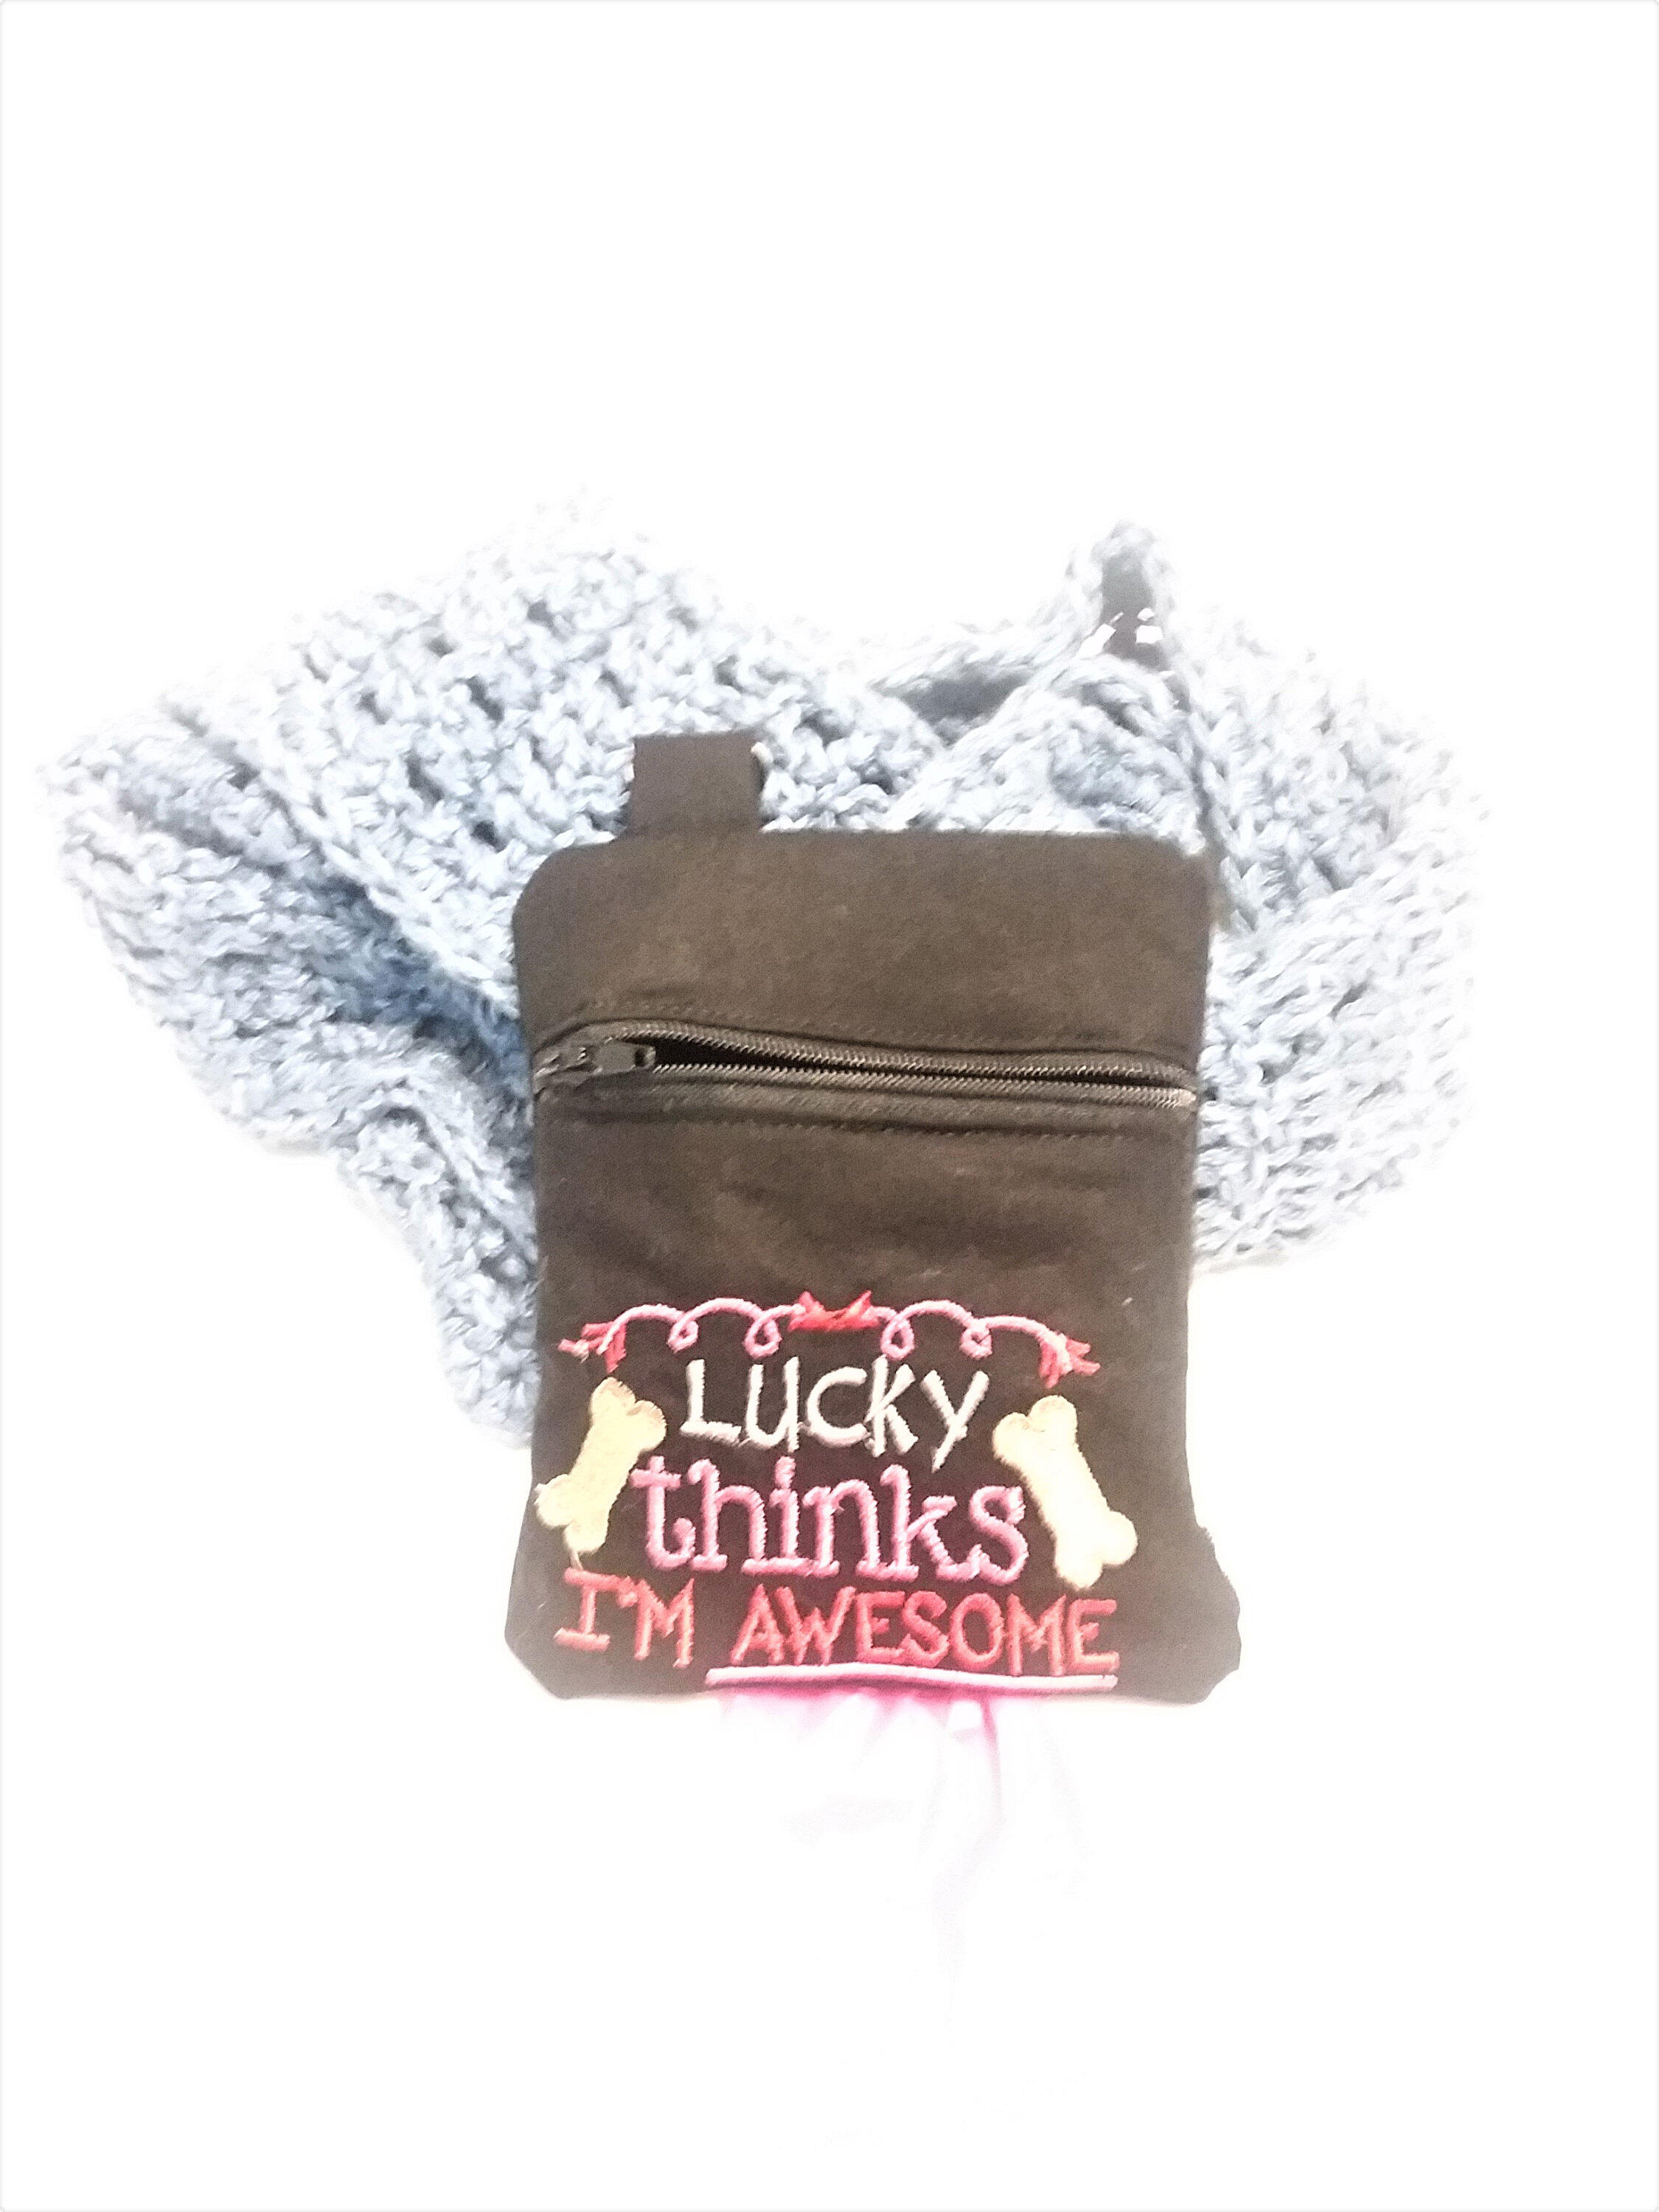 my dog mom thinks i am awesome poop bag holder handcrafted in USA by A  Fur Baby Favorite